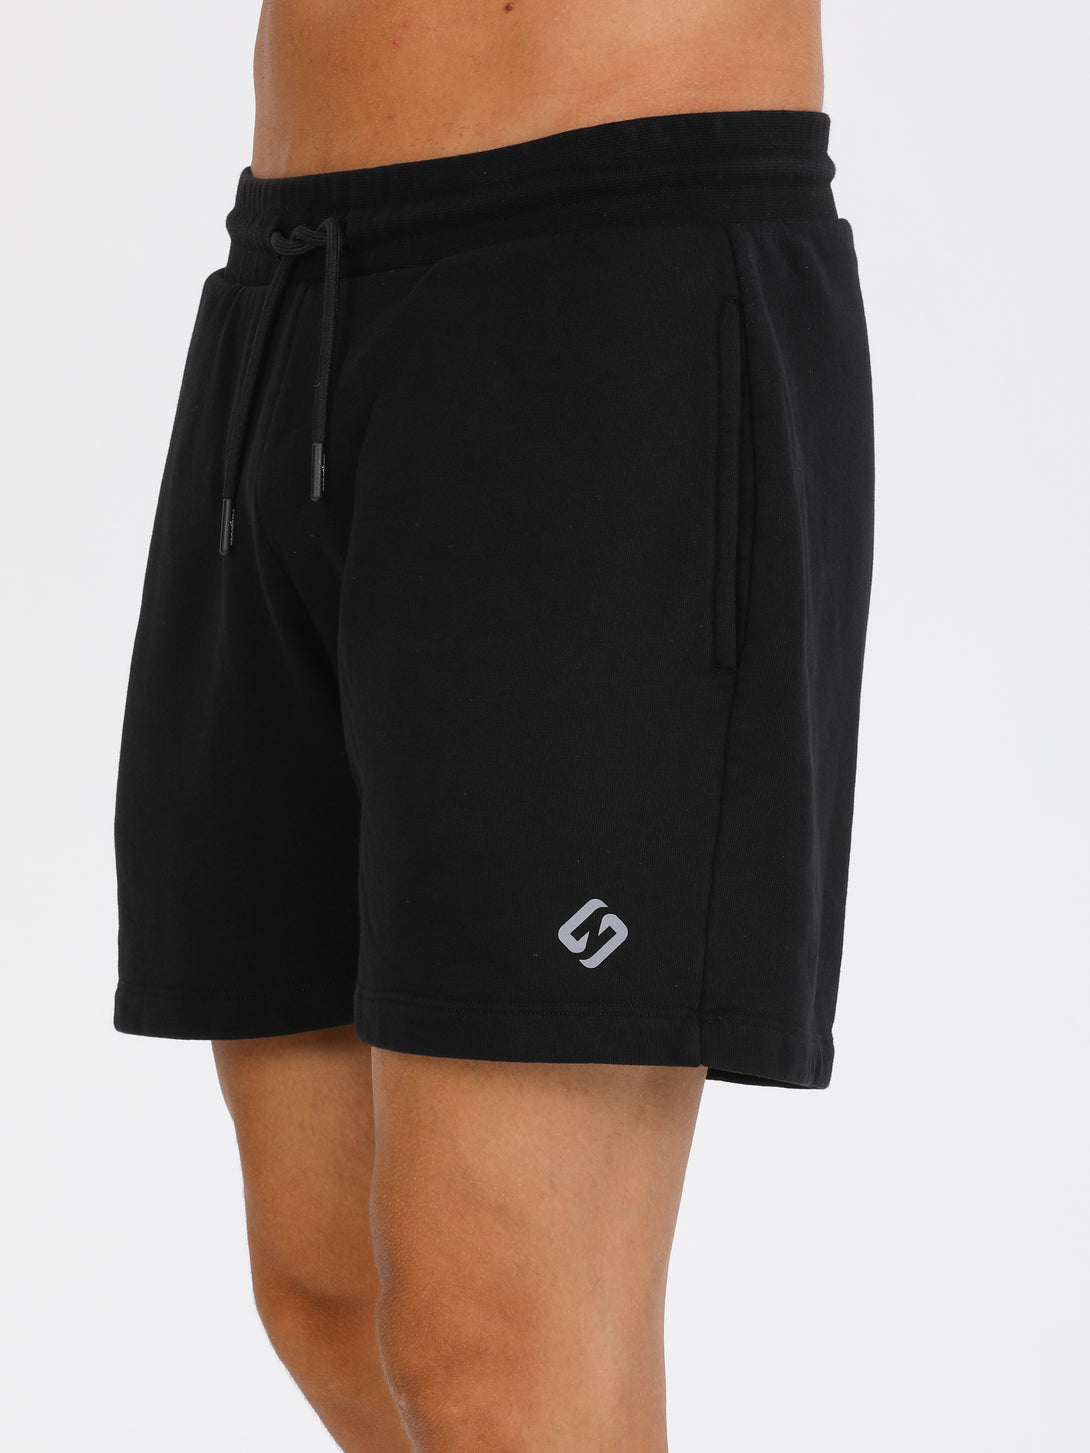 A Man Wearing Black Color Essential Mens Workout Shorts